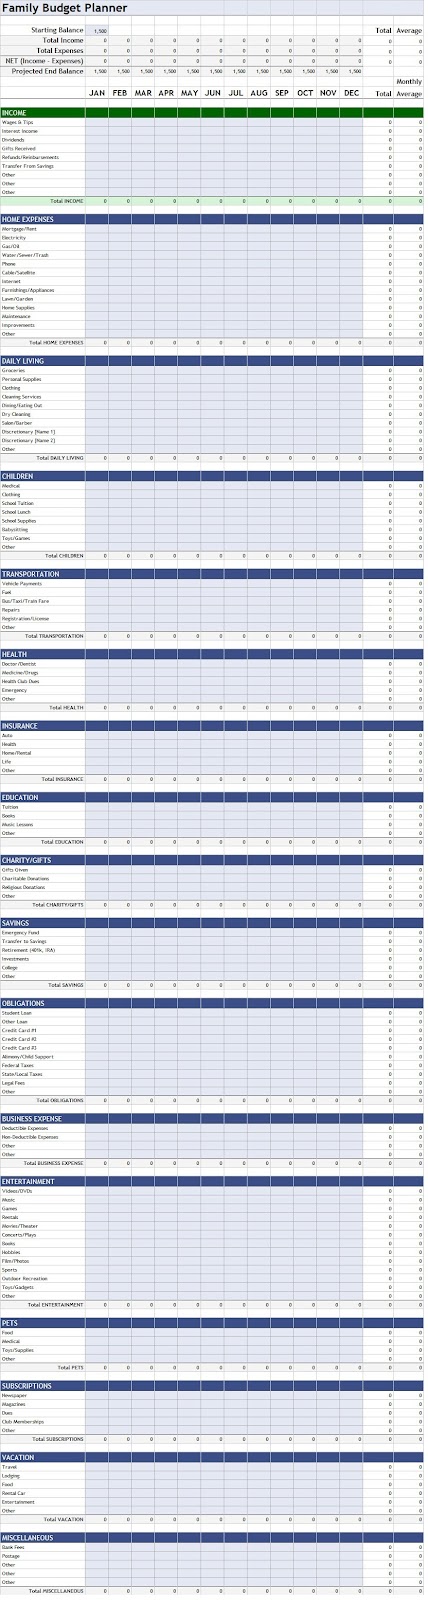 family-budget-planner-template-template-sample